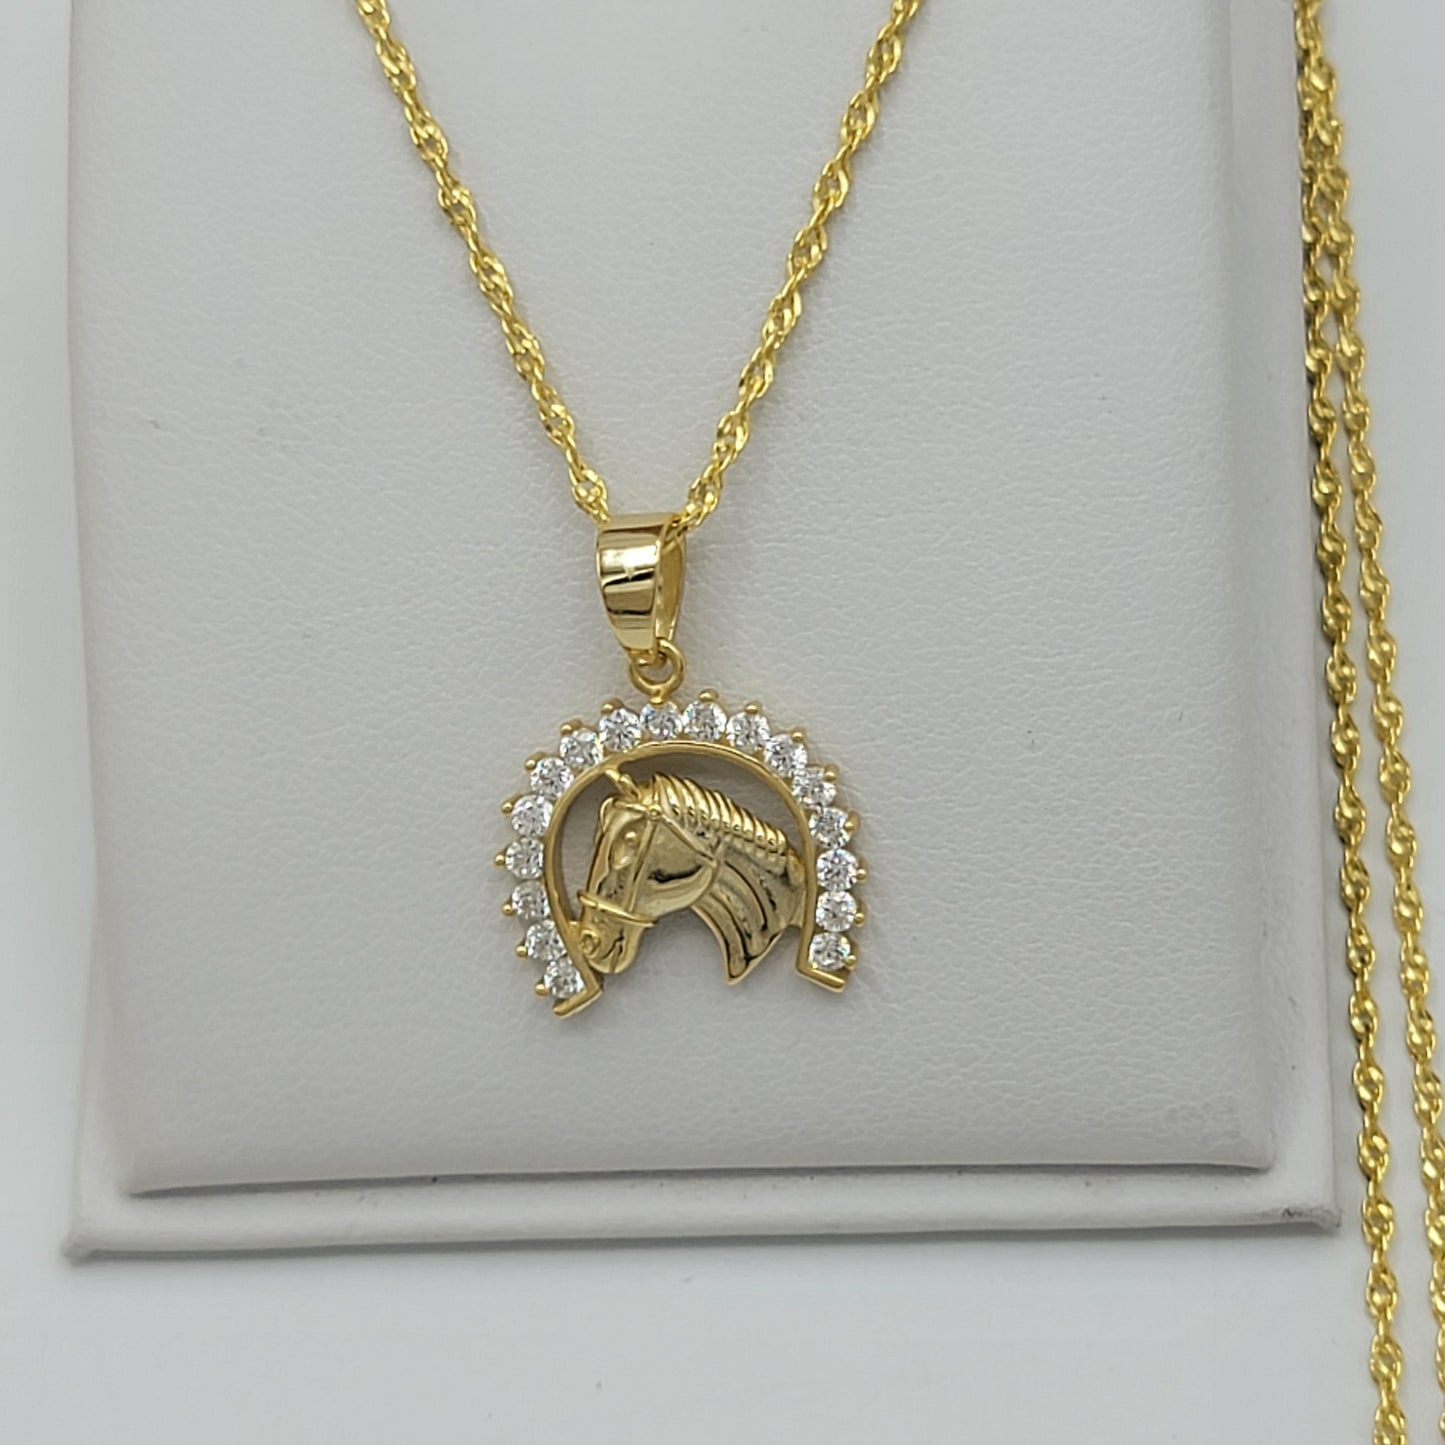 Solid 925 Sterling Silver - Gold Plated. CZ Horseshoe Pendant & Chain.